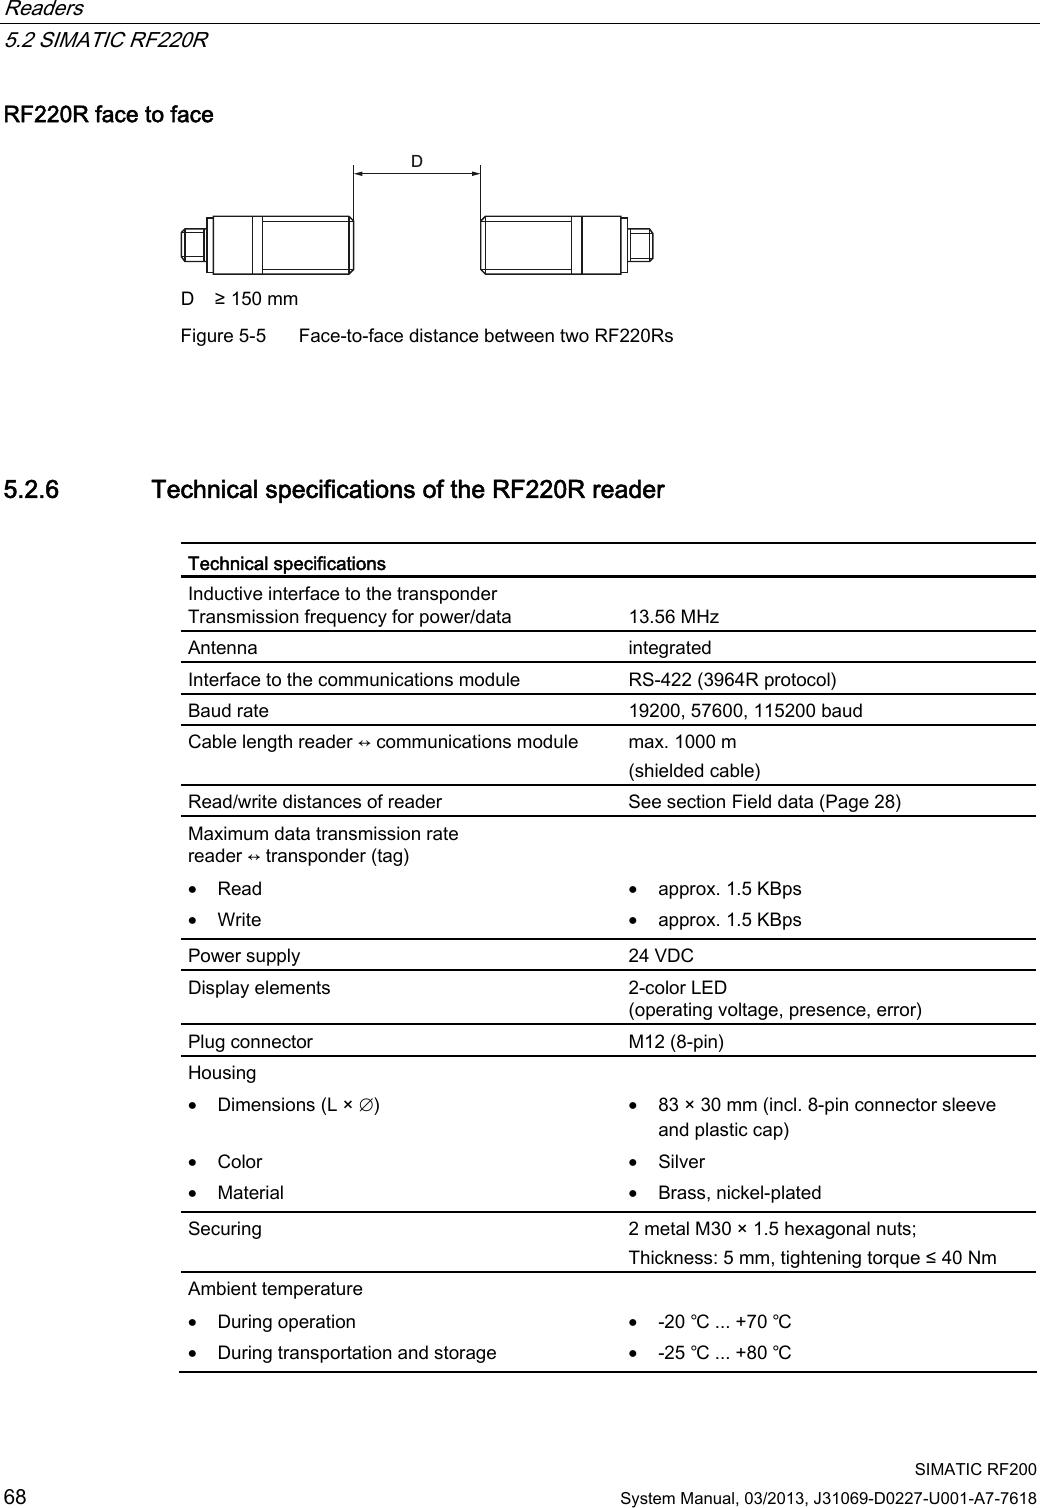 Readers   5.2 SIMATIC RF220R  SIMATIC RF200 68 System Manual, 03/2013, J31069-D0227-U001-A7-7618 RF220R face to face &apos; D  ≥ 150 mm Figure 5-5  Face-to-face distance between two RF220Rs  5.2.6 Technical specifications of the RF220R reader  Technical specifications   Inductive interface to the transponder Transmission frequency for power/data  13.56 MHz Antenna  integrated Interface to the communications module  RS-422 (3964R protocol) Baud rate  19200, 57600, 115200 baud Cable length reader ↔ communications module  max. 1000 m (shielded cable) Read/write distances of reader  See section Field data (Page 28)  Maximum data transmission rate reader ↔ transponder (tag) • Read • Write   • approx. 1.5 KBps • approx. 1.5 KBps Power supply  24 VDC Display elements  2-color LED (operating voltage, presence, error) Plug connector  M12 (8-pin) Housing • Dimensions (L × ∅)  • Color • Material  • 83 × 30 mm (incl. 8-pin connector sleeve and plastic cap) • Silver • Brass, nickel-plated Securing  2 metal M30 × 1.5 hexagonal nuts; Thickness: 5 mm, tightening torque ≤ 40 Nm Ambient temperature  • During operation • During transportation and storage  • -20 ℃ ... +70 ℃ • -25 ℃ ... +80 ℃ 